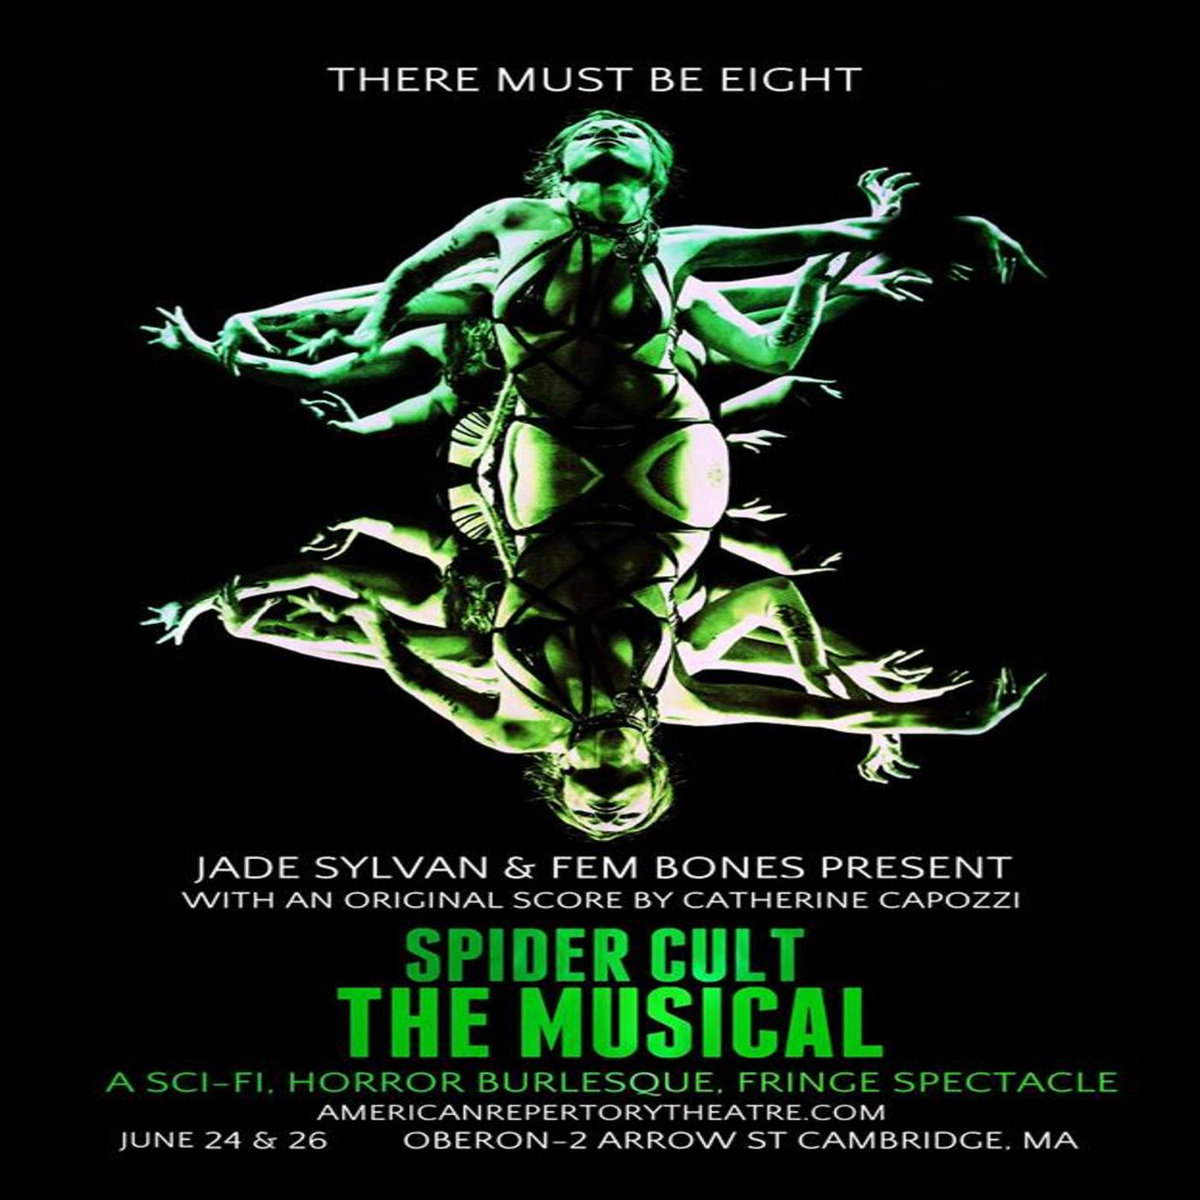 Spider Cult the Musical, Music Soundtrack | Catherine Capozzi | Axemunkee  and Catherine Capozzi